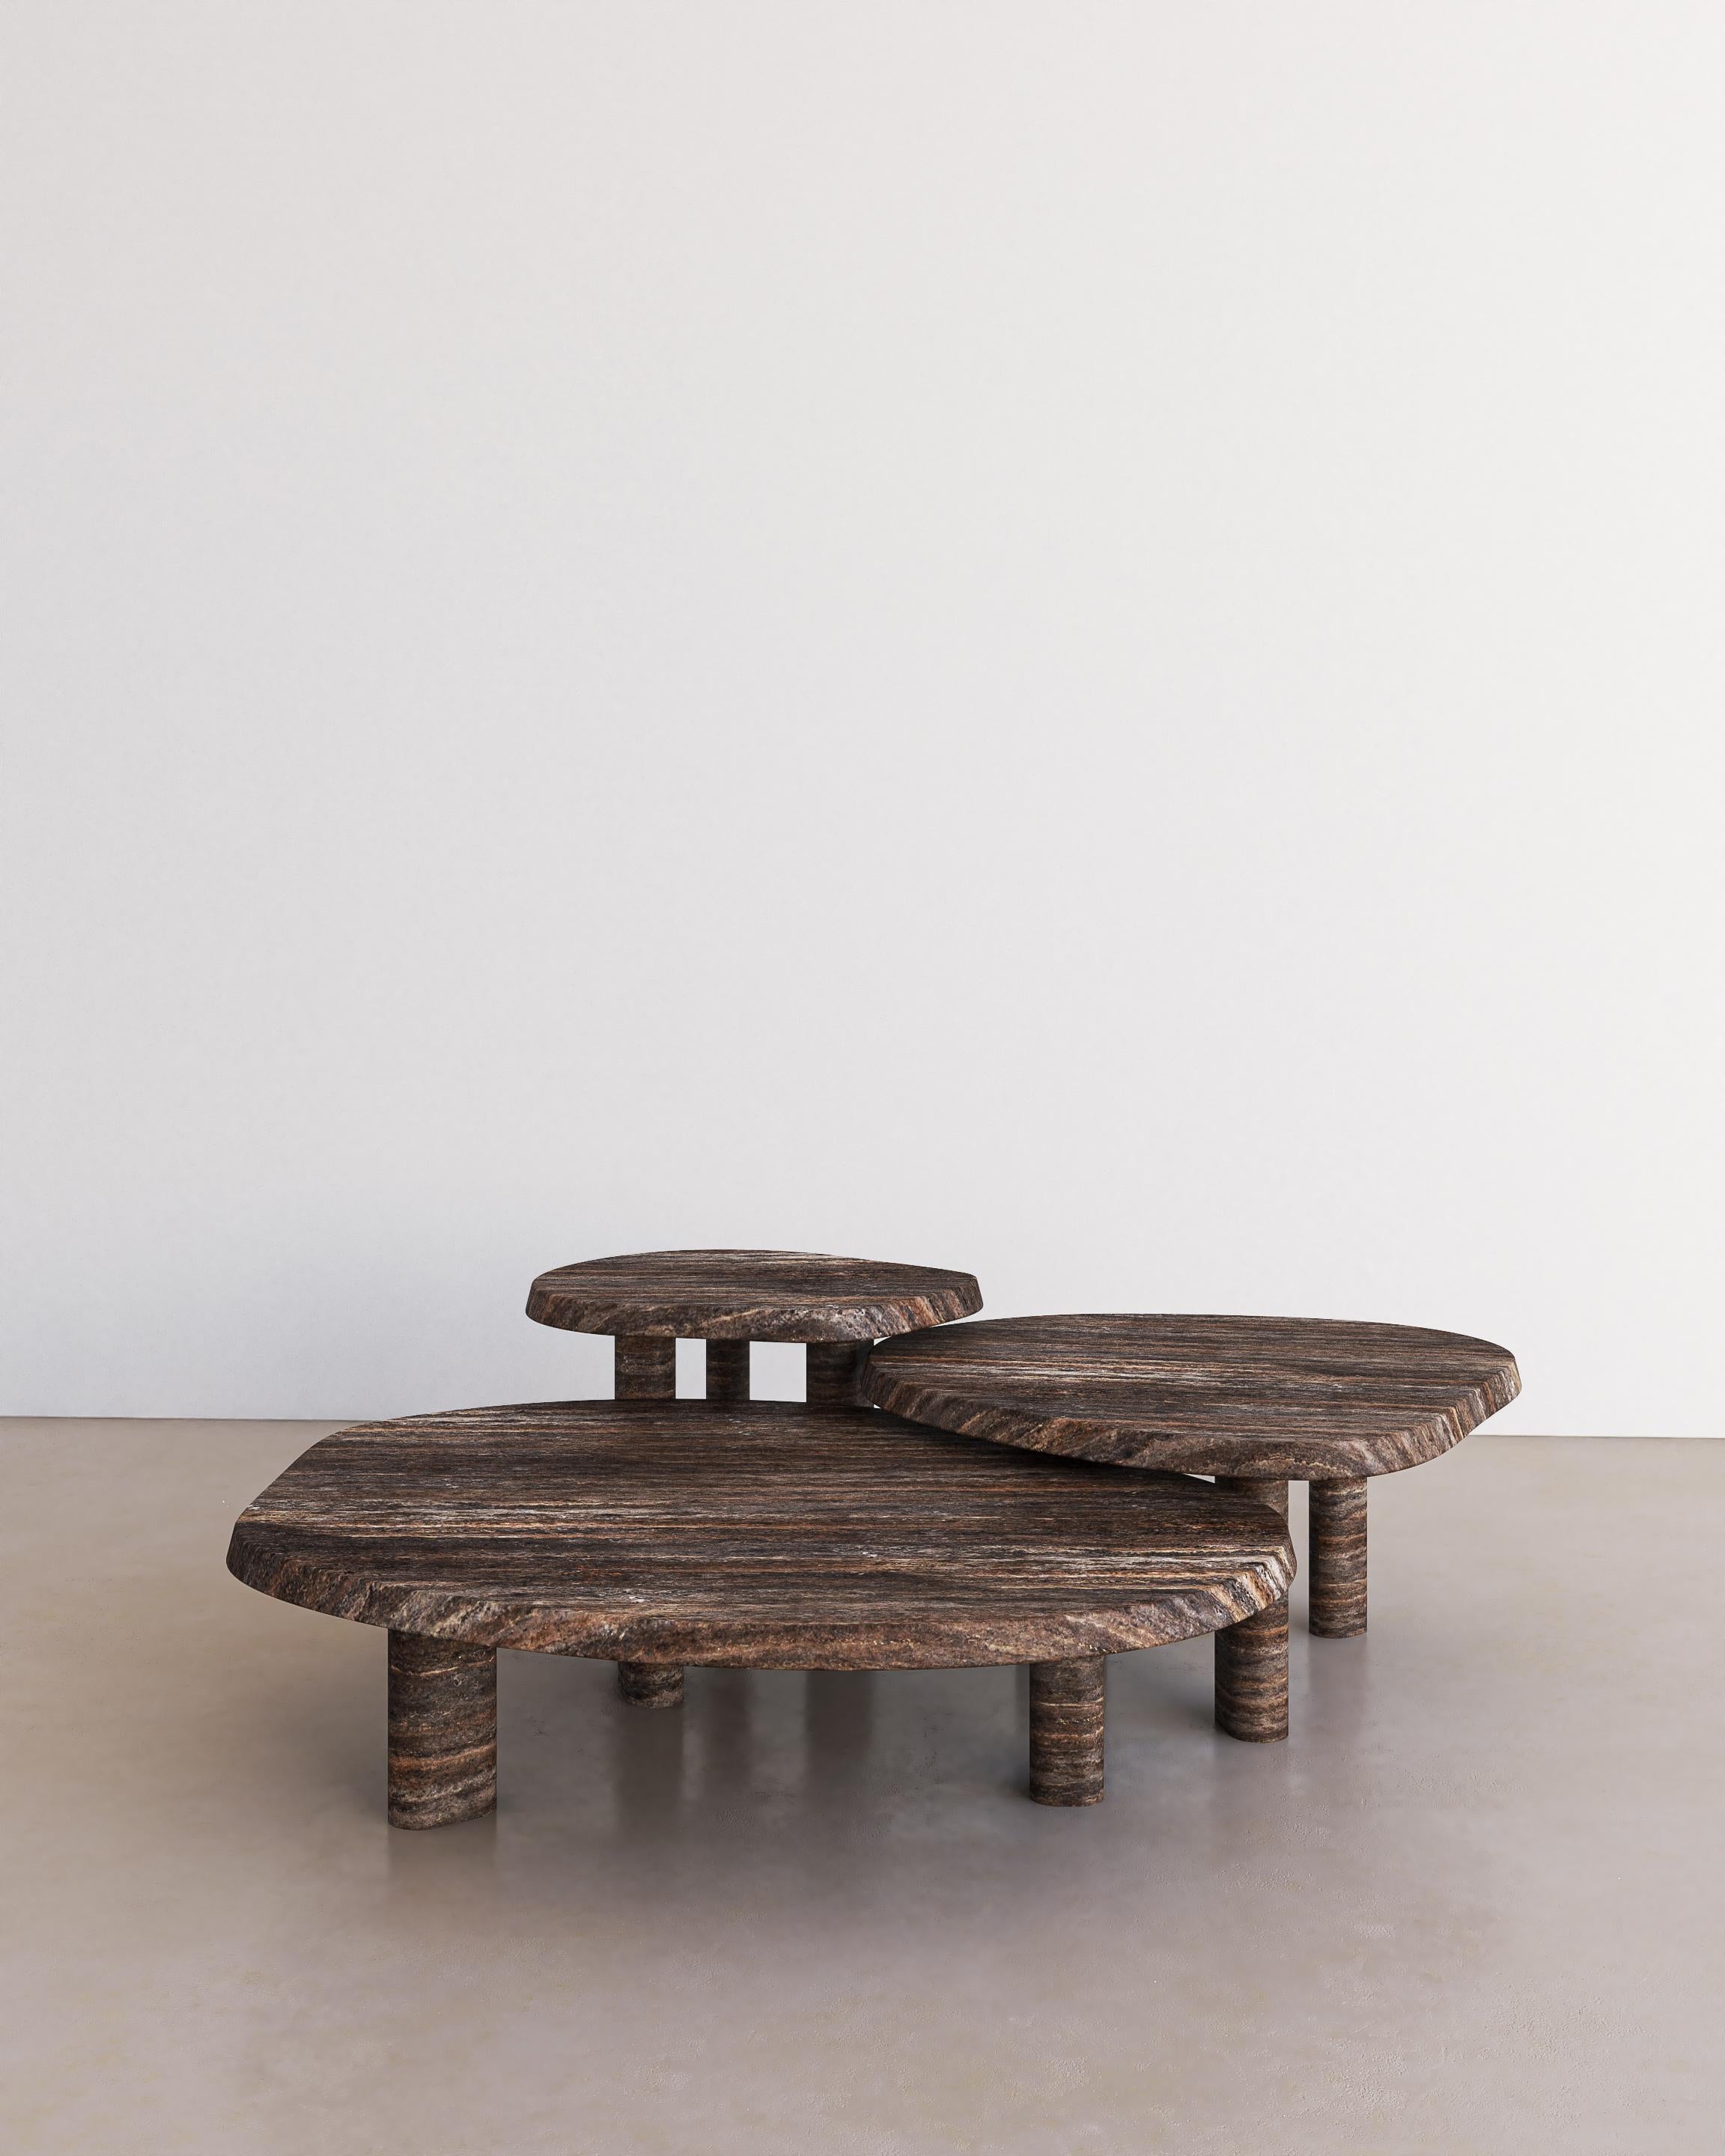 The Fiori Coffee Table in Cacao Travertine by The Essentialist infers a delicate sense of organicism, a vision of sublime is born, revolutionising beauty and deifying stone in its truest expression. Fiori forges a perpetual statement of intuitive